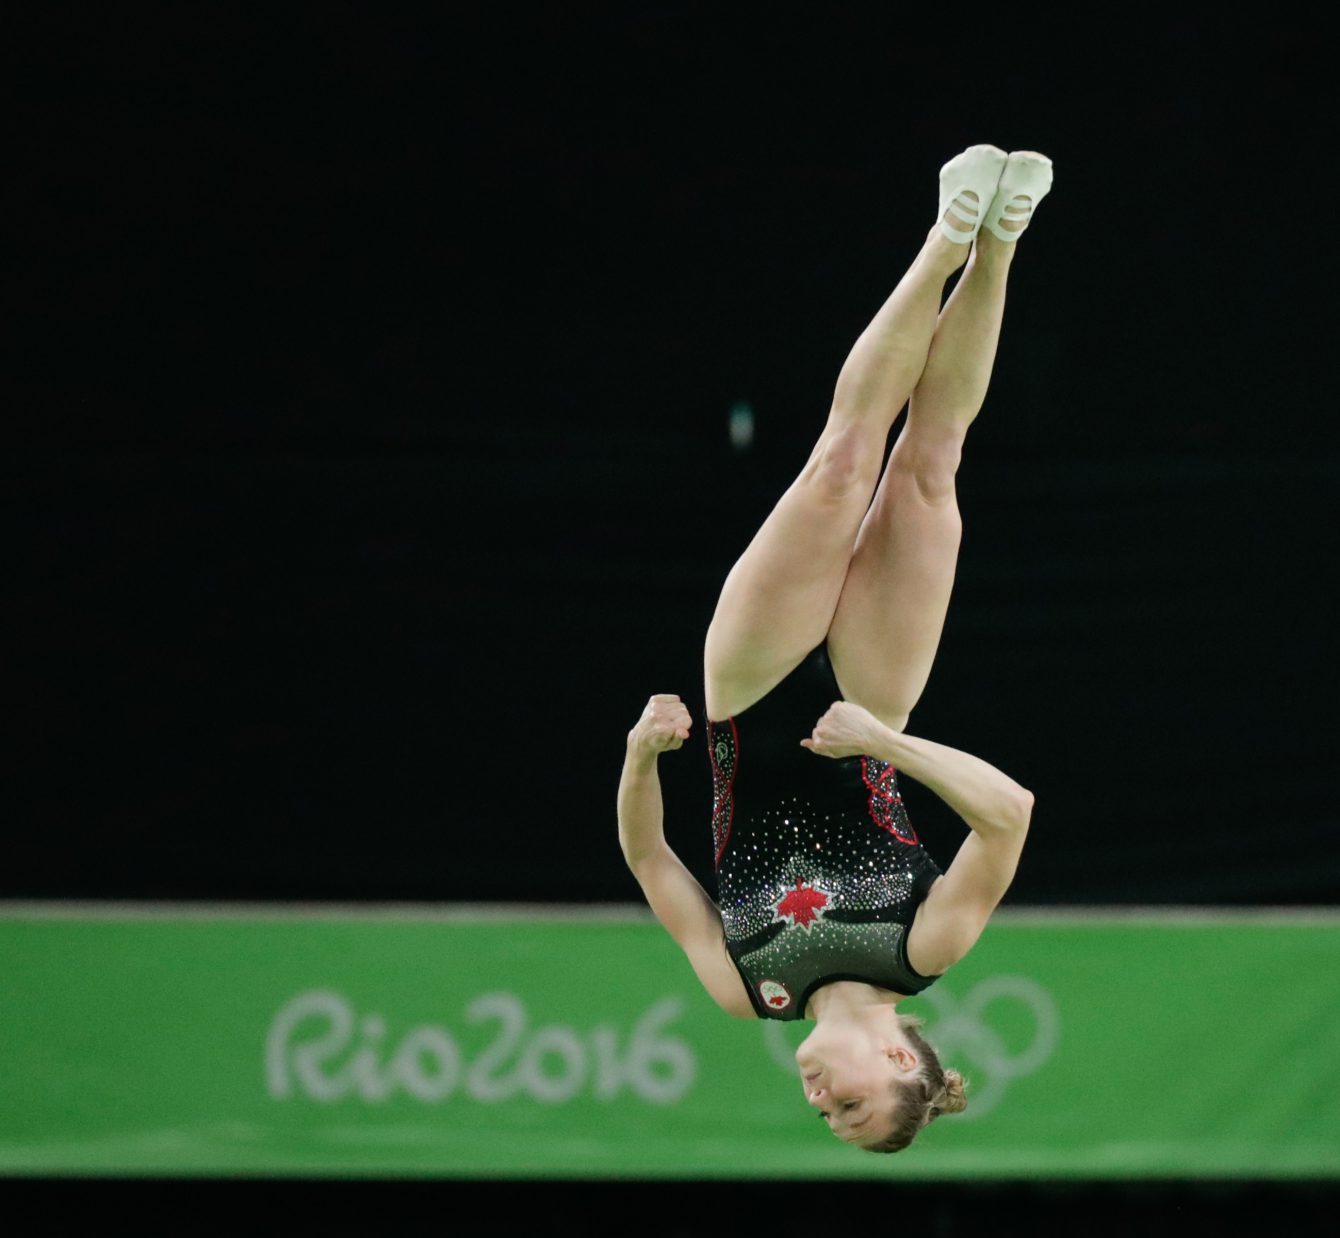 Rosie MacLennan during Rio 2016 Olympic trampoline qualifications on August 12, 2016. (photo/JasonRansom)